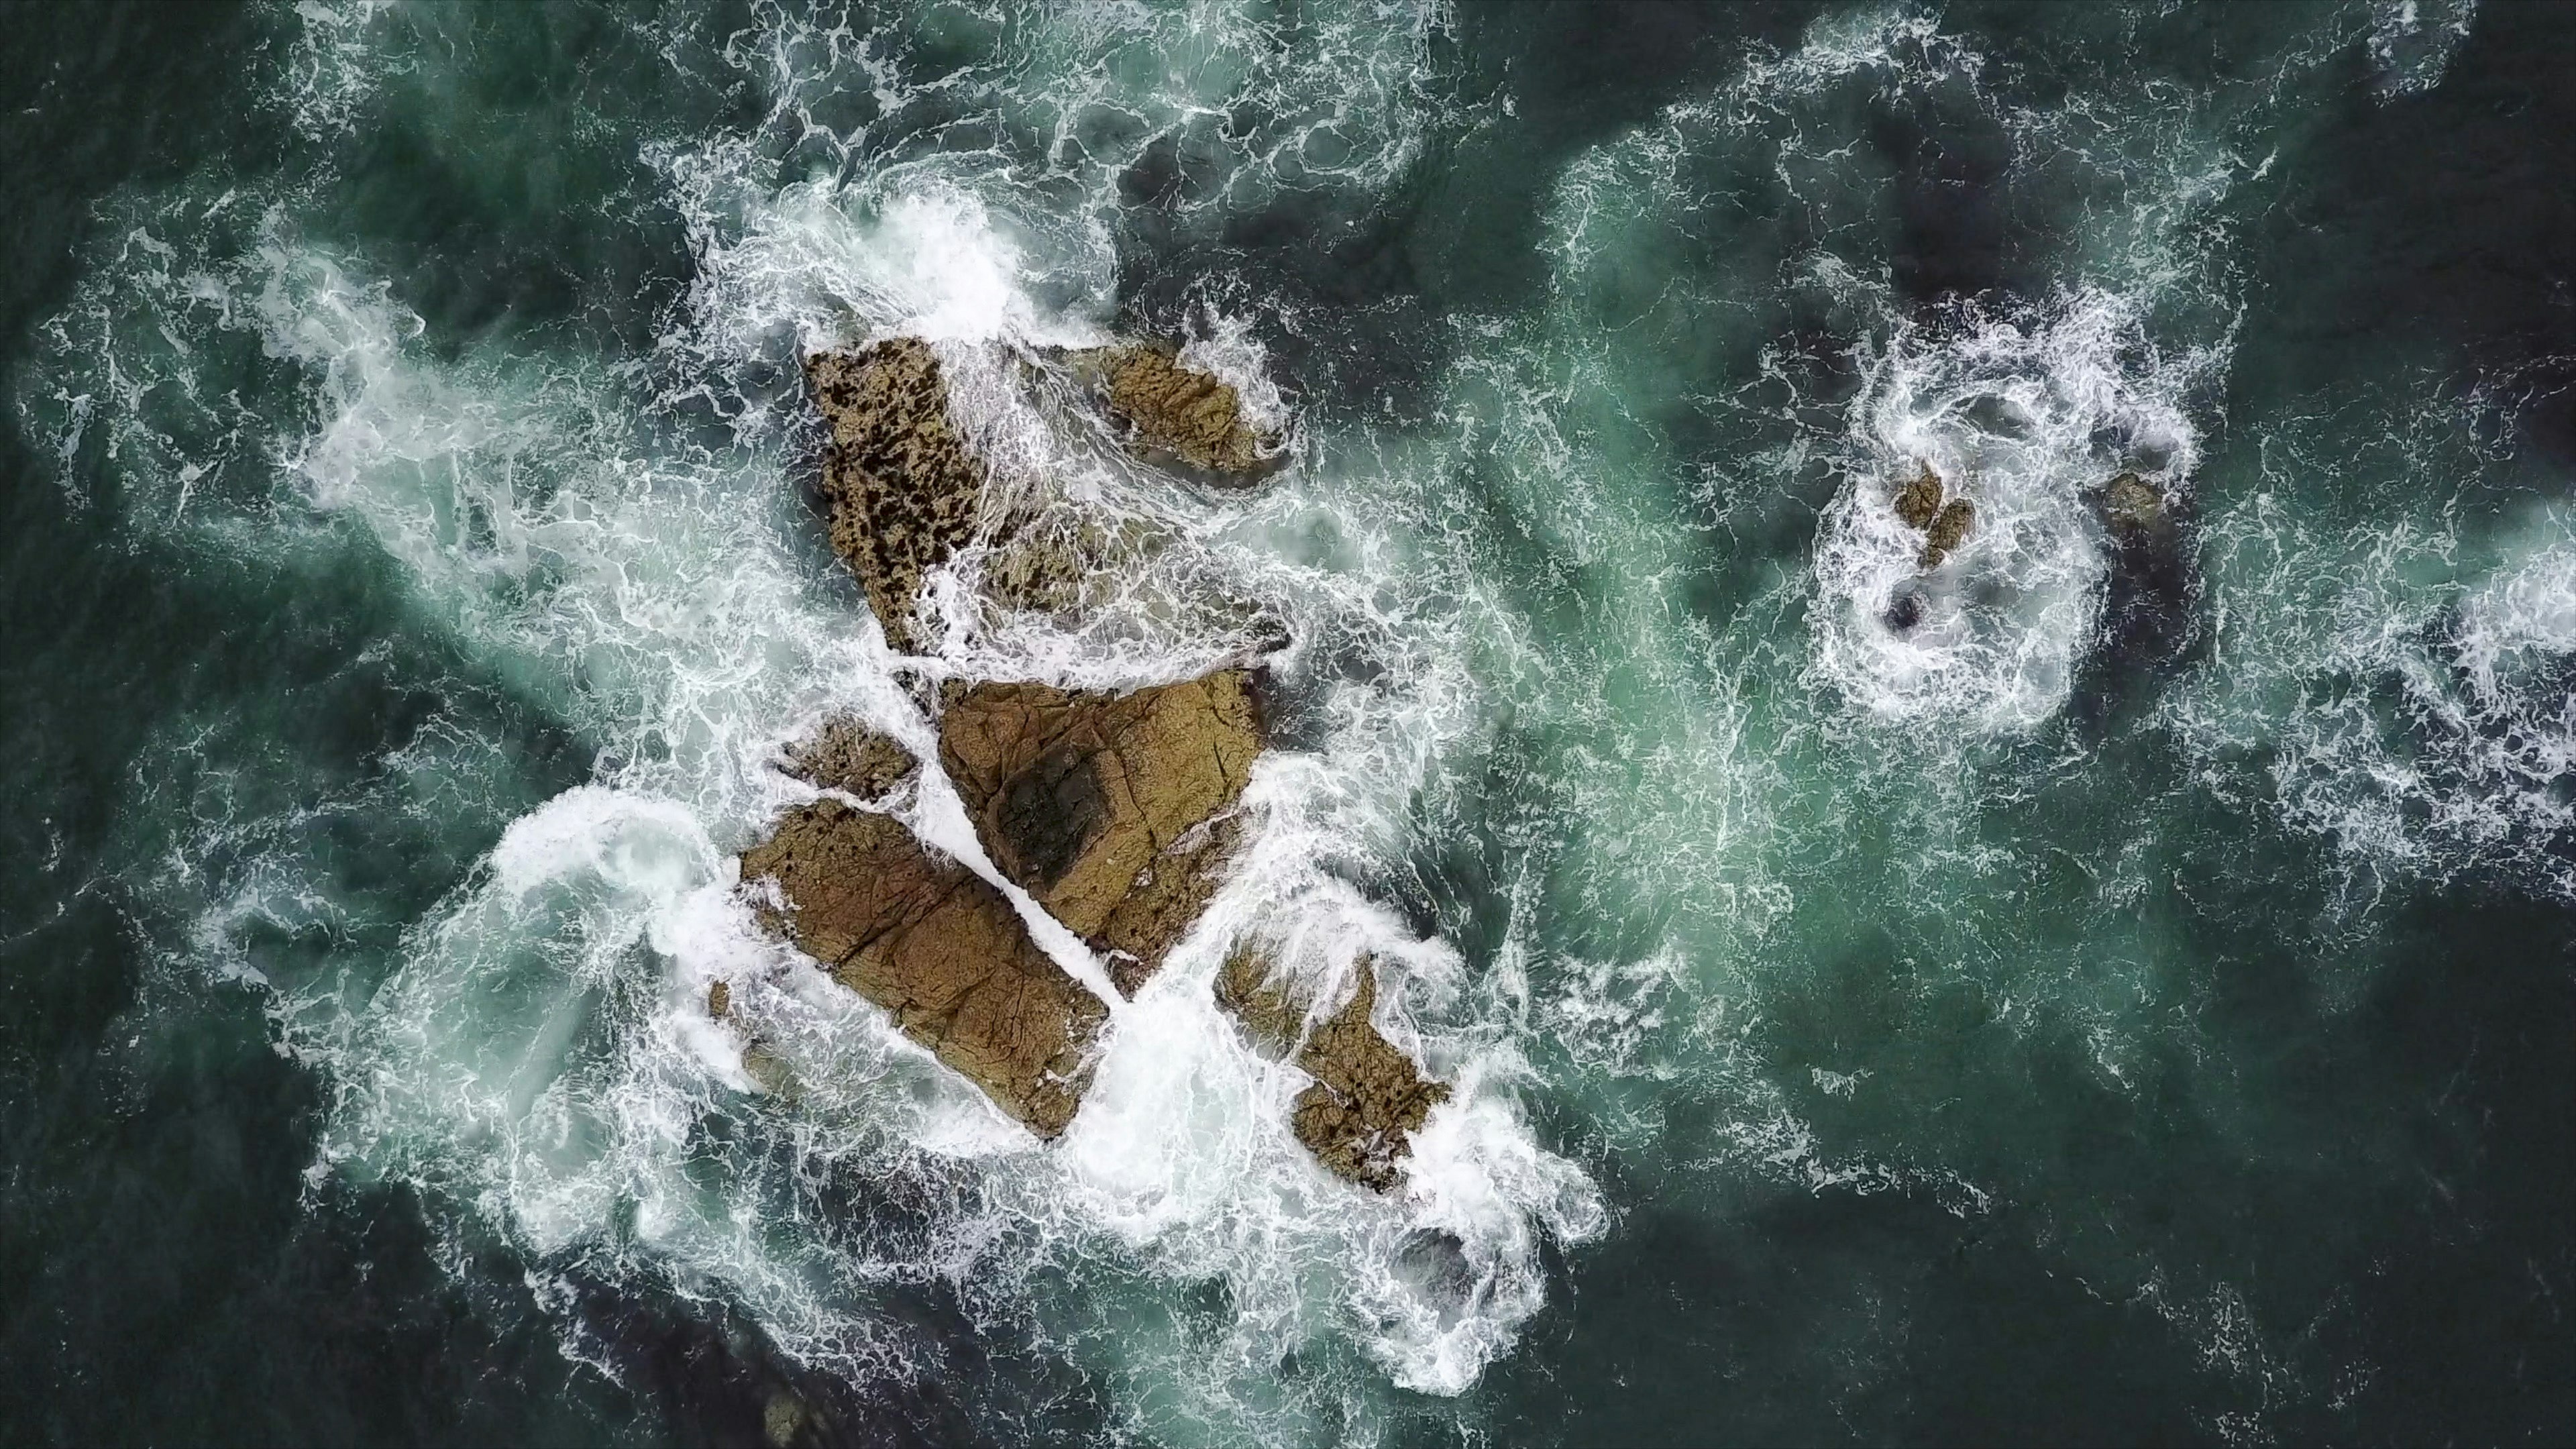 rock formation surrounded by body of water in aerial photography